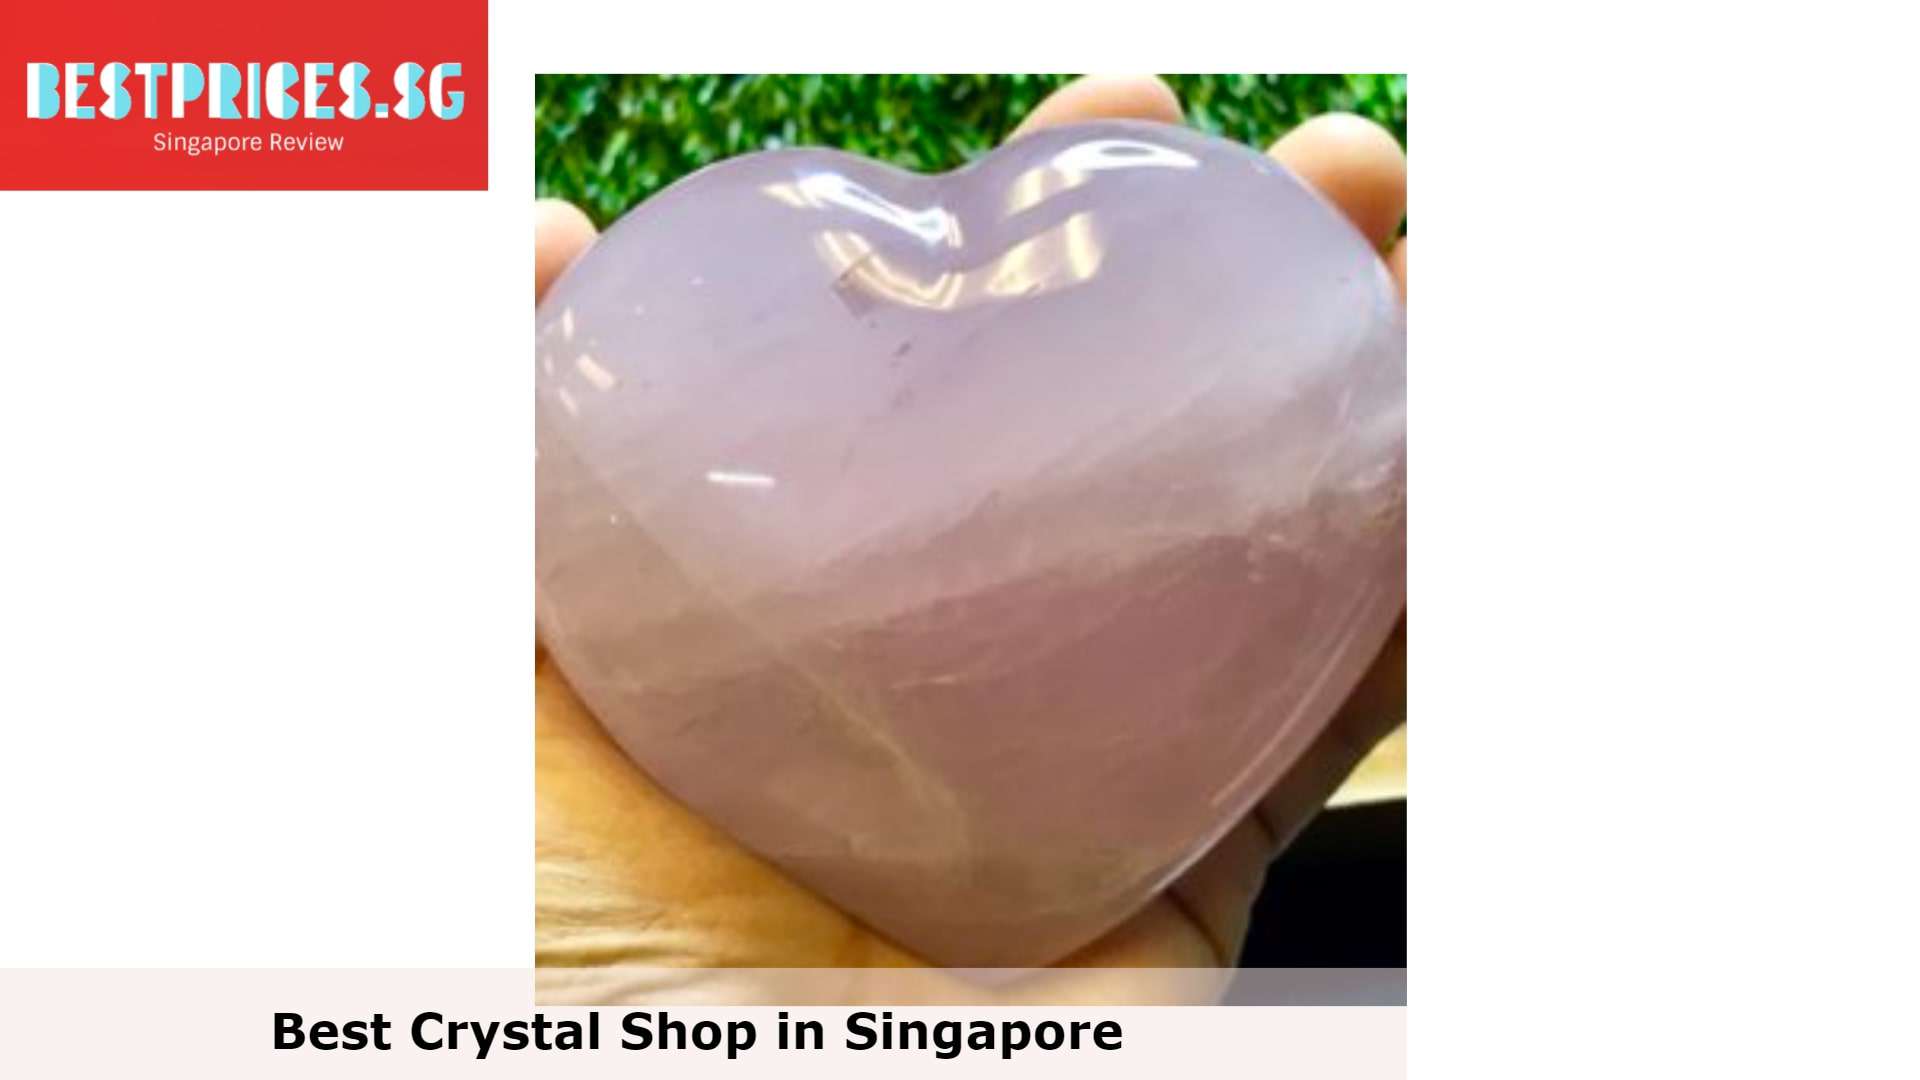 Secret Crystals SG - Crystal Shop Singapore, Crystal Shop Singapore, Where can I find crystals in Singapore?, What are good online crystal shops?, What is the price of 1kg crystal?, How much does a piece of crystal cost?, Crystal Singapore, healing crystals online Singapore, crystal wholesale singapore, crystal shop singapore near me, where to buy cheap crystals in singapore, crystal shop singapore online, crystal shop chinatown, crystal shop singapore orchard, crystal shop bugis, secret crystals singapore crystal shop, 